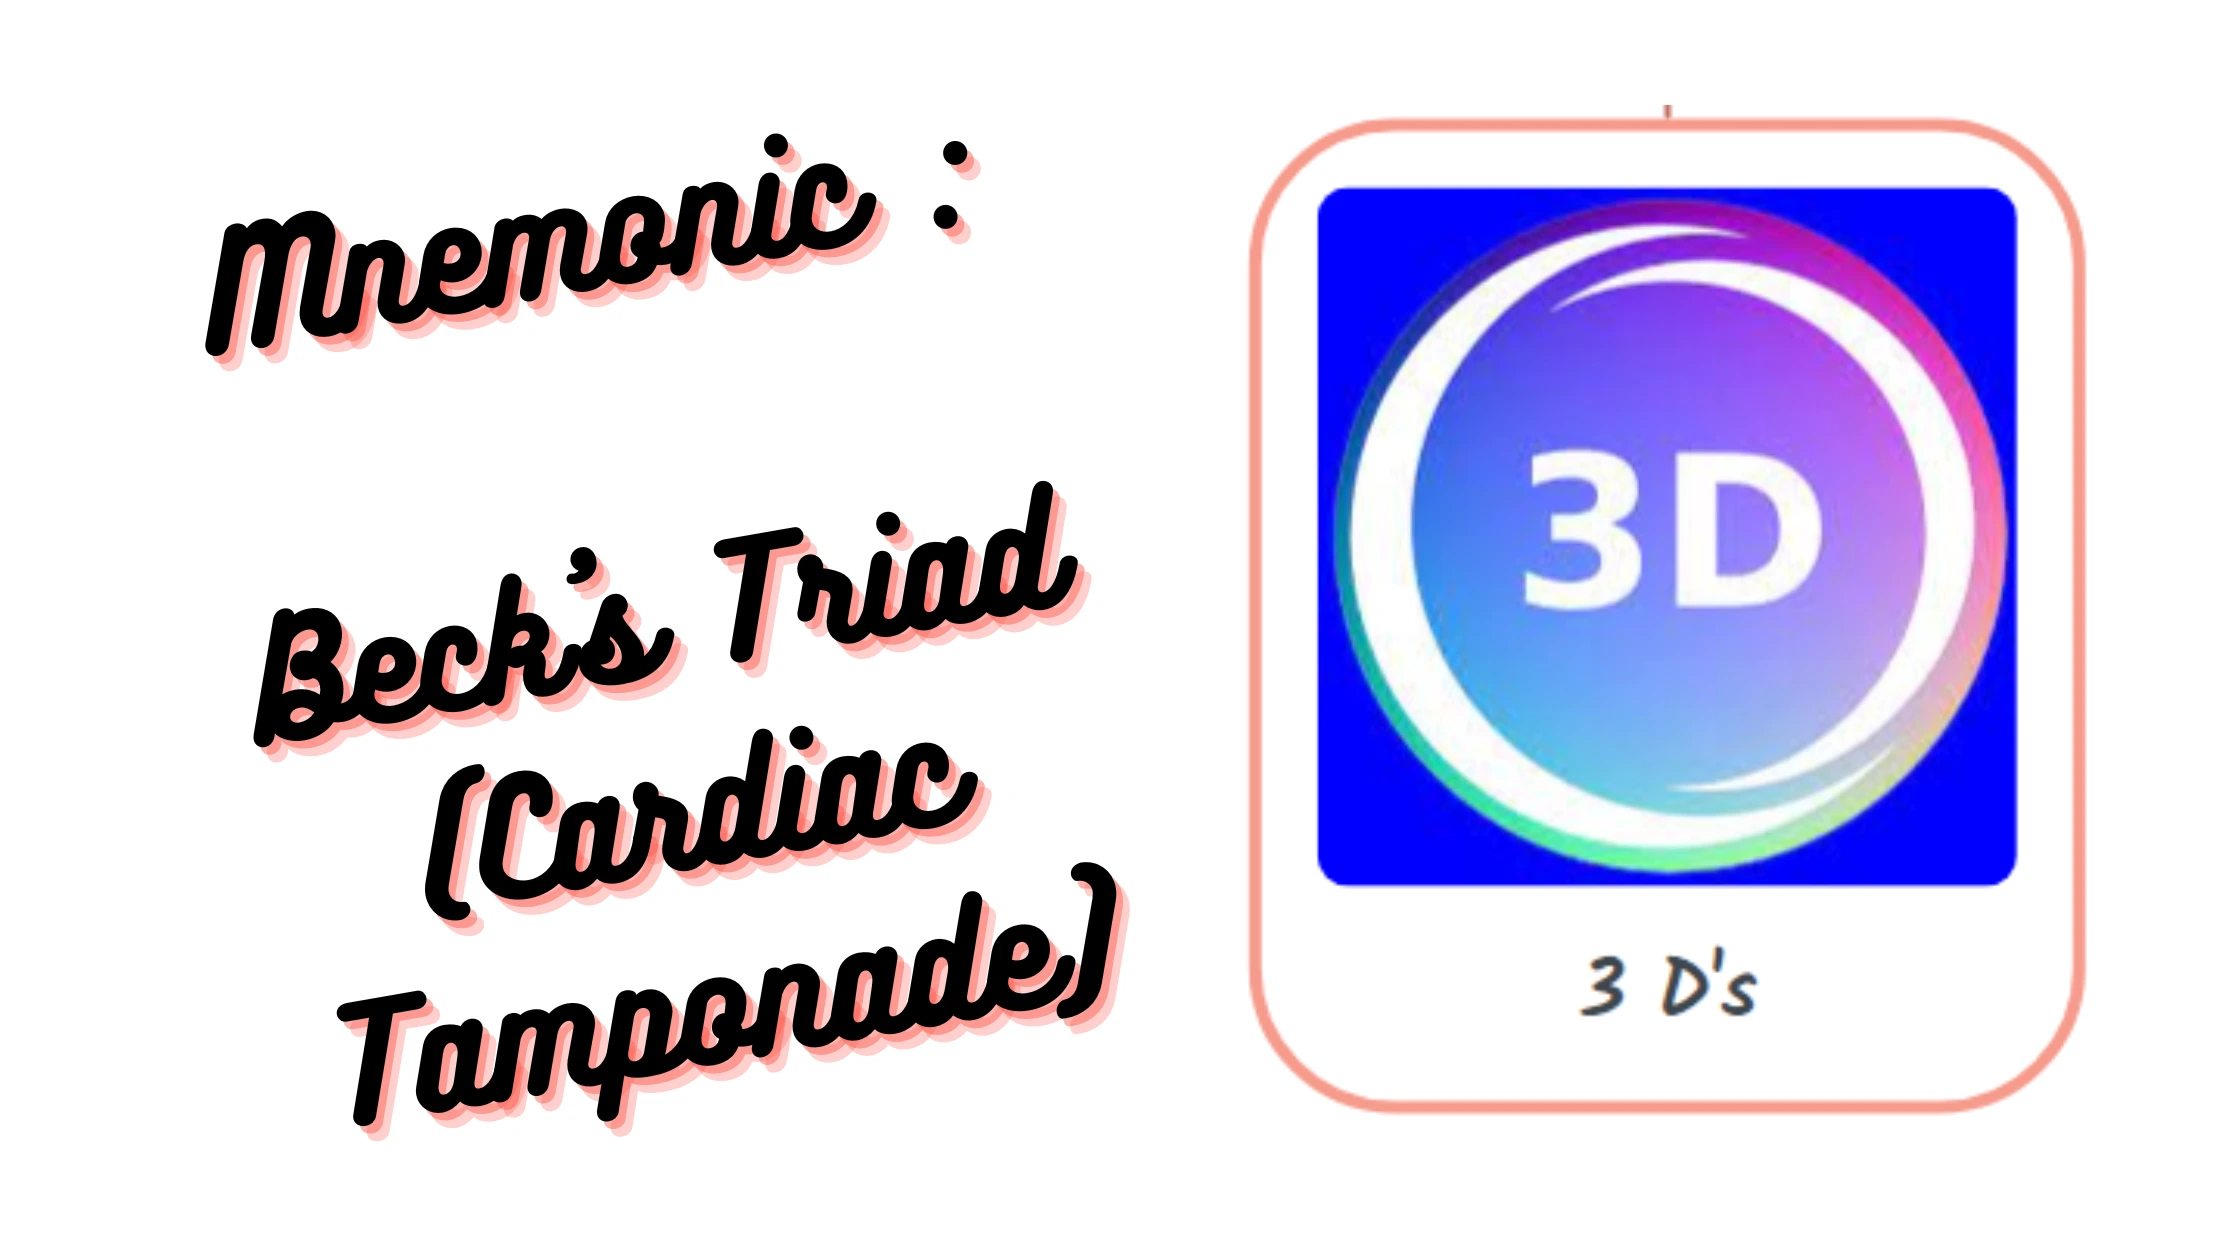 You are currently viewing Mnemonic : Beck’s Triad (Cardiac Tamponade)